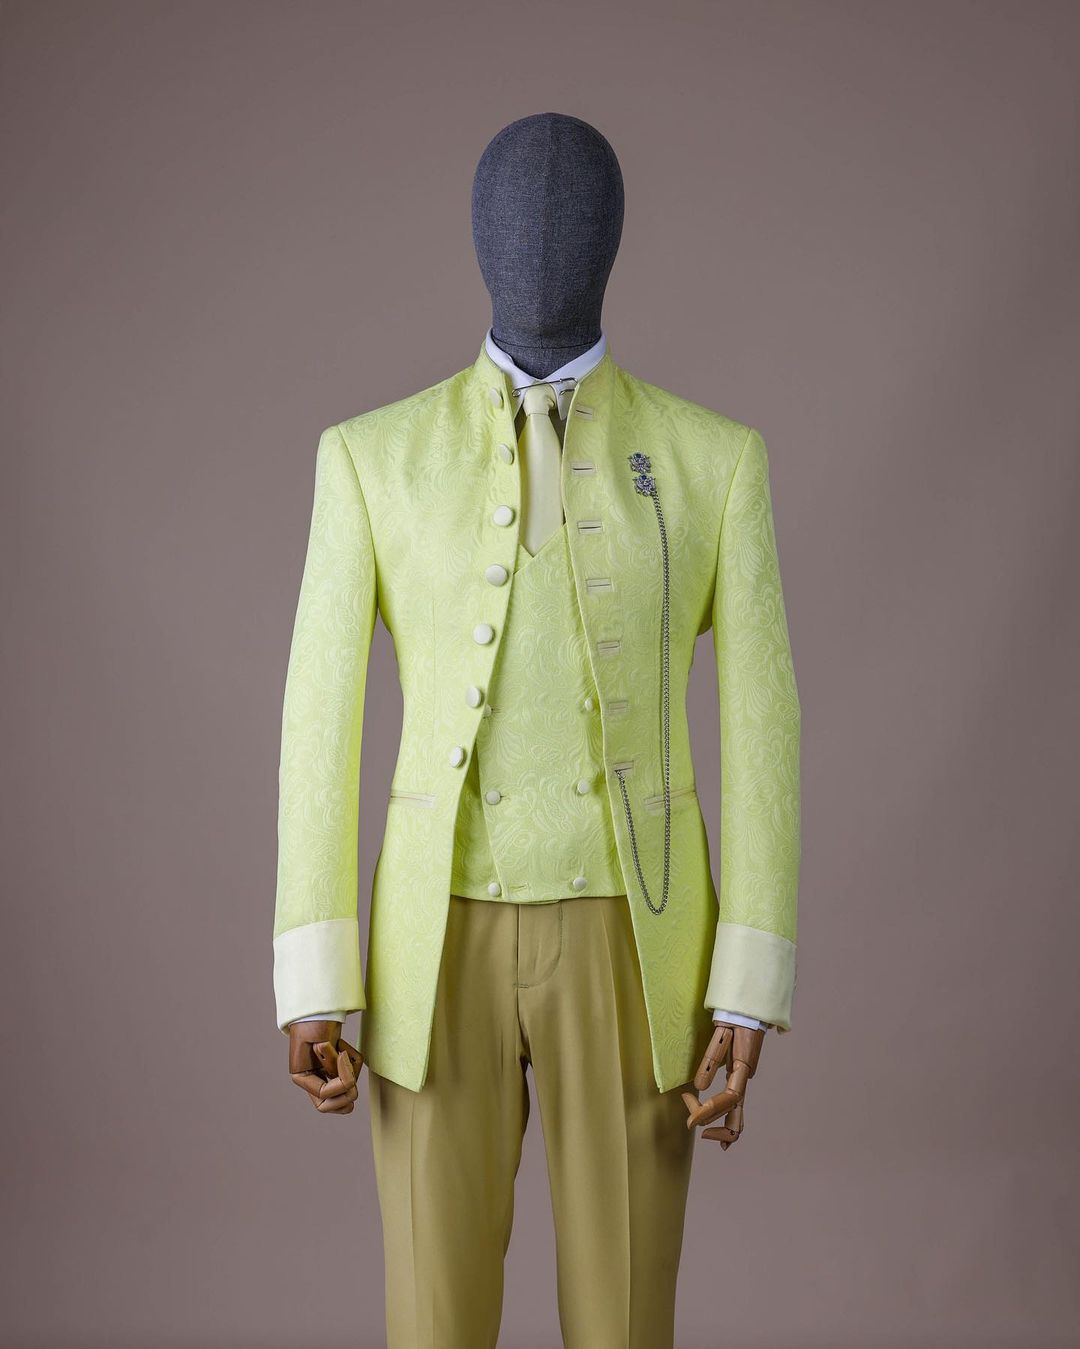 TELVIN NWAFOR - Lemon Green suit is a Perfect Must-have.... | Facebook